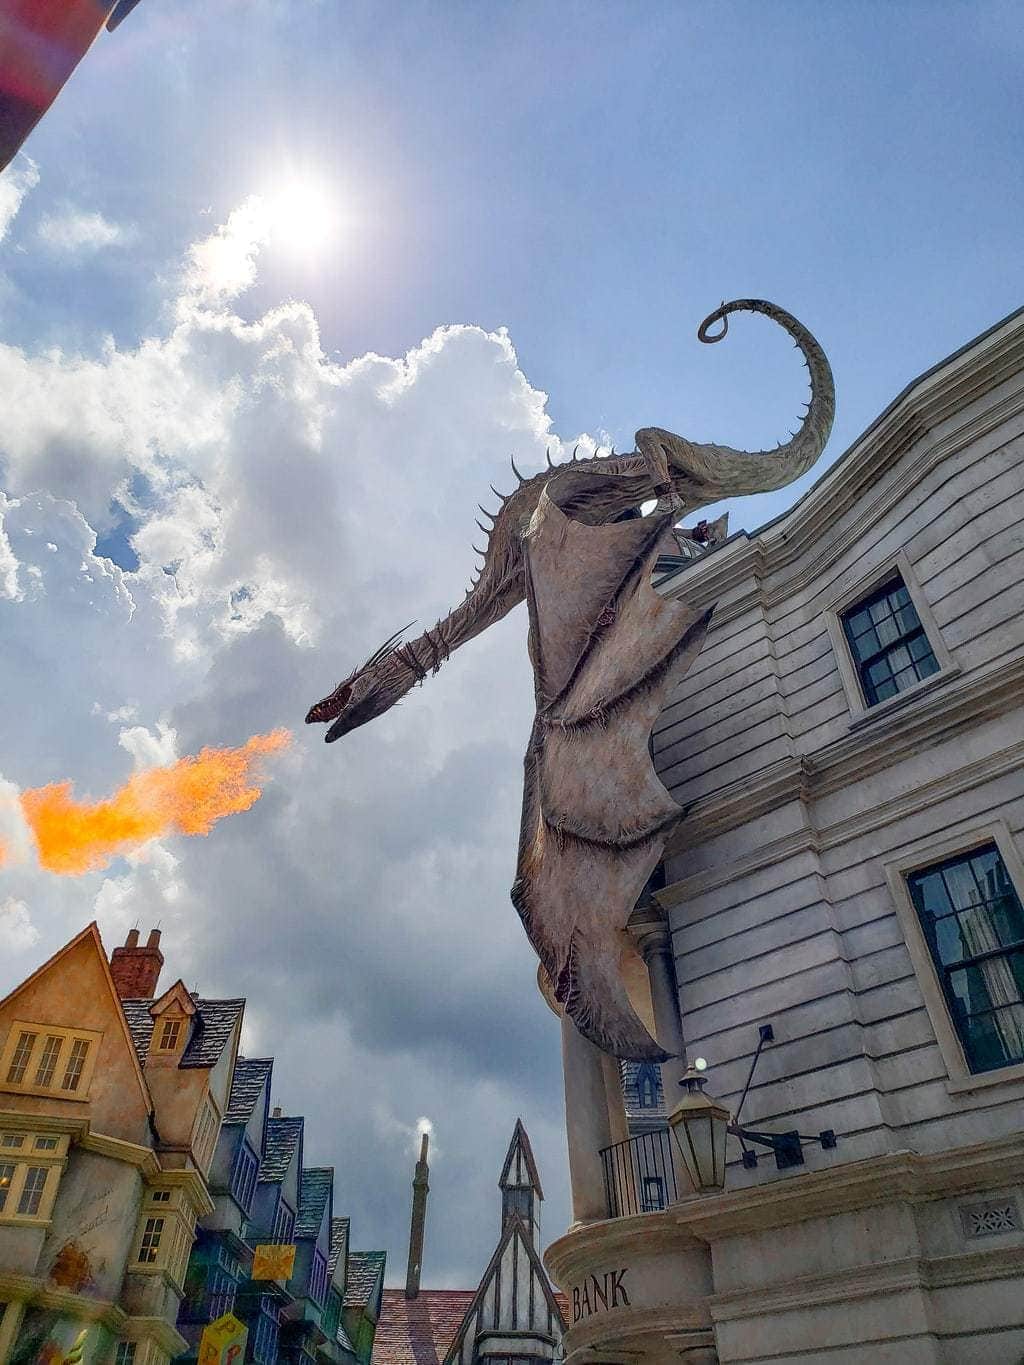 Diagon Alley Dragon breathing fire in Wizarding World of Harry Potter at Universal Orlando